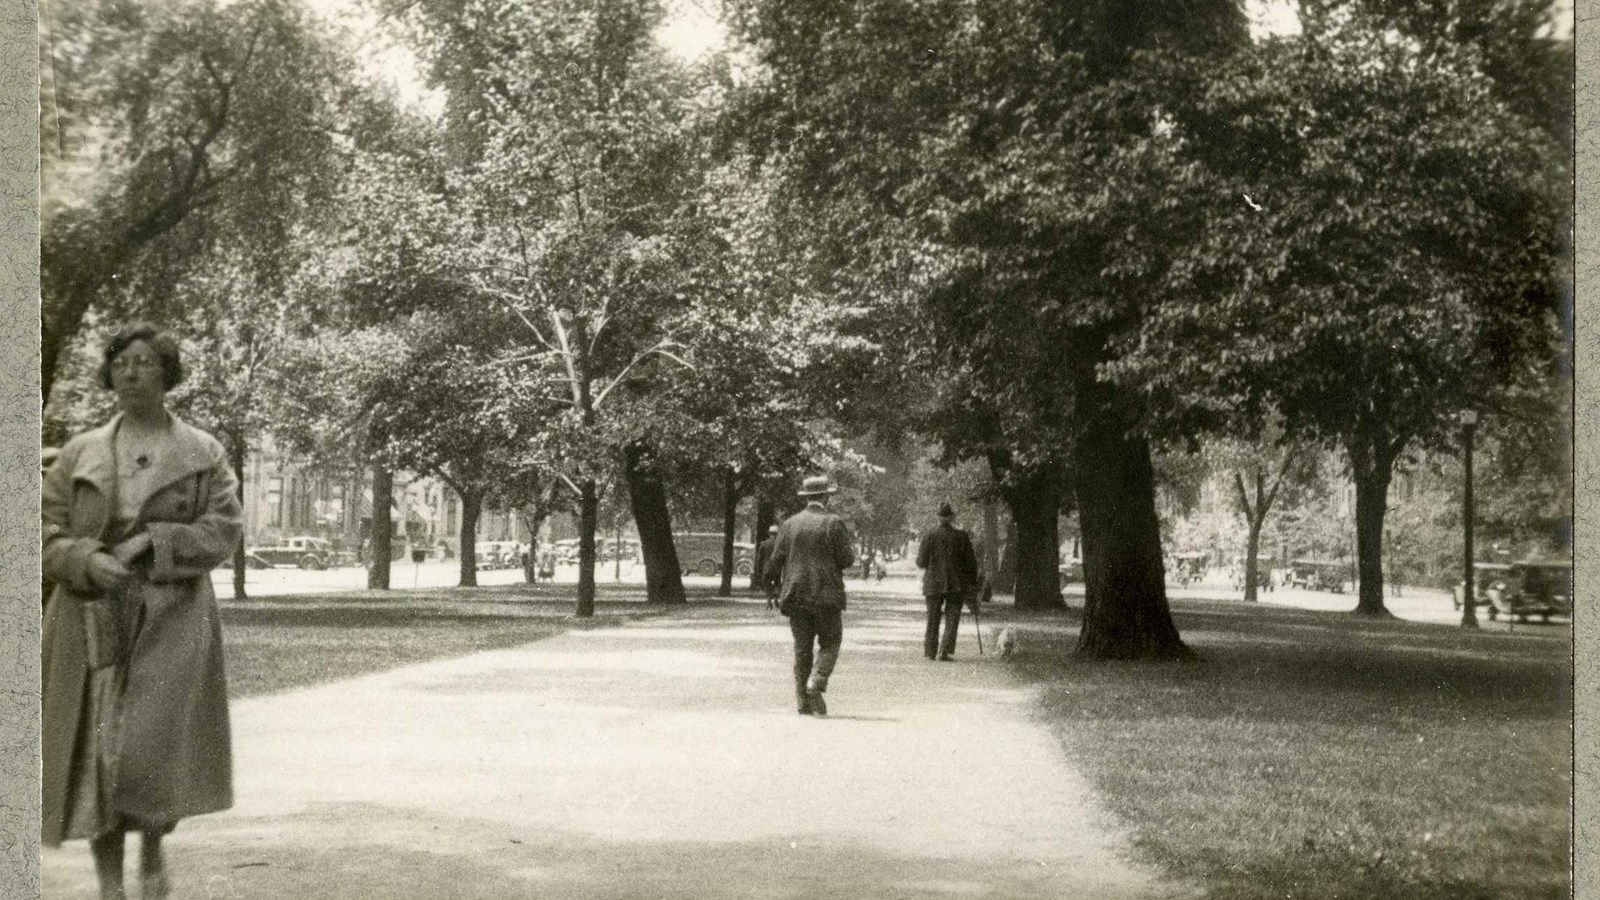 Black and white of flat path with people walking along the path, grass and trees on both sides